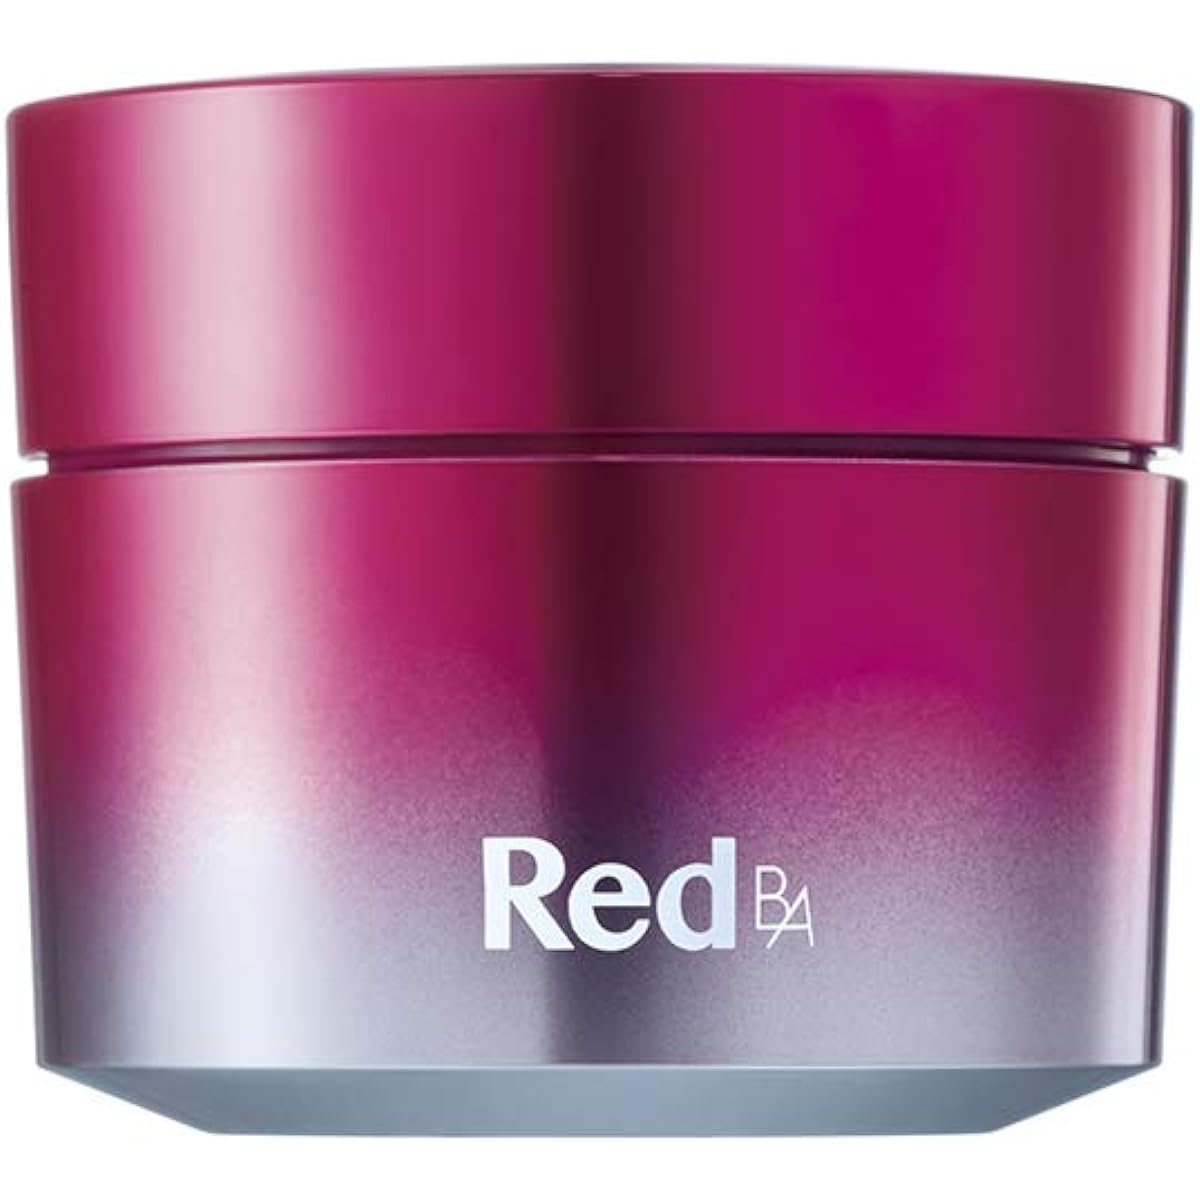 POLA Red B.A Contour Attention Mask [Face Mask] 85g